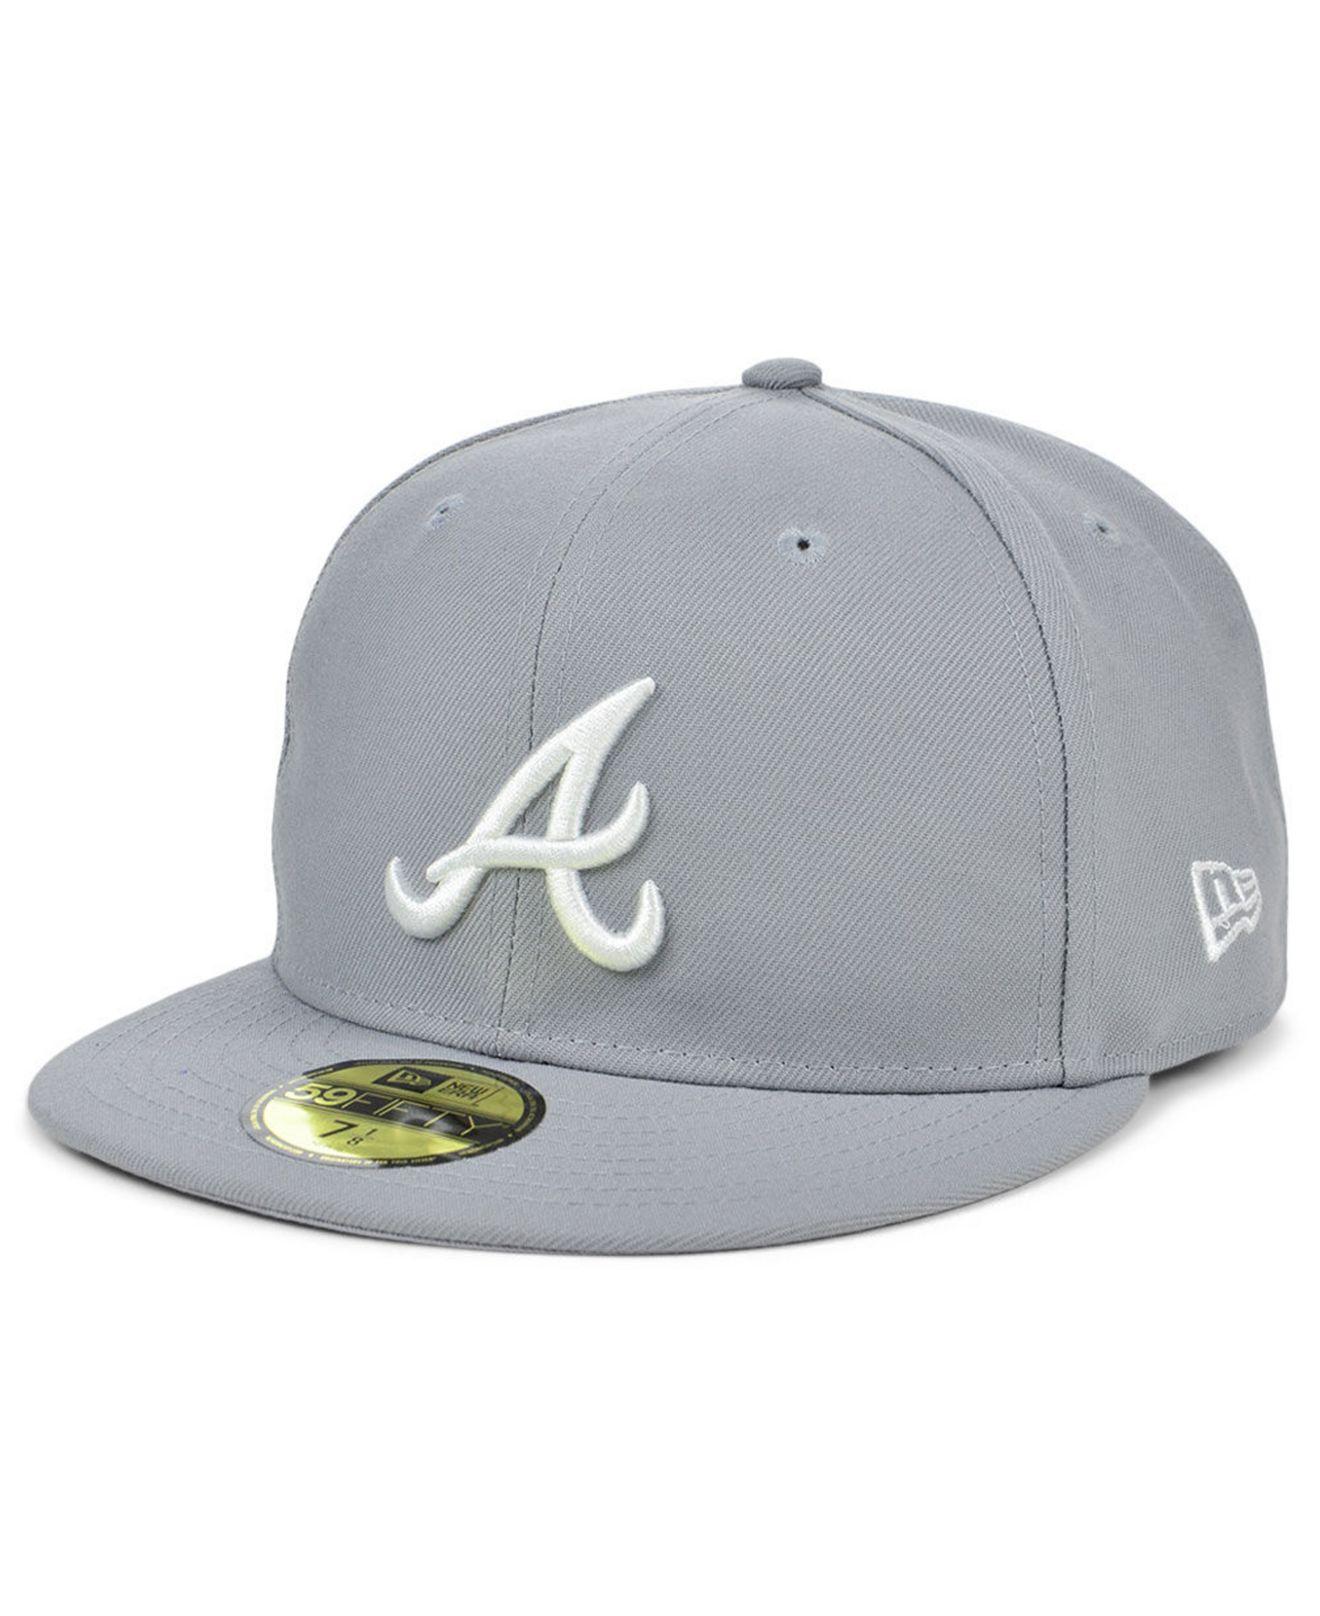 KTZ Atlanta Braves Re-dub 59fifty Fitted Cap in Gray for Men